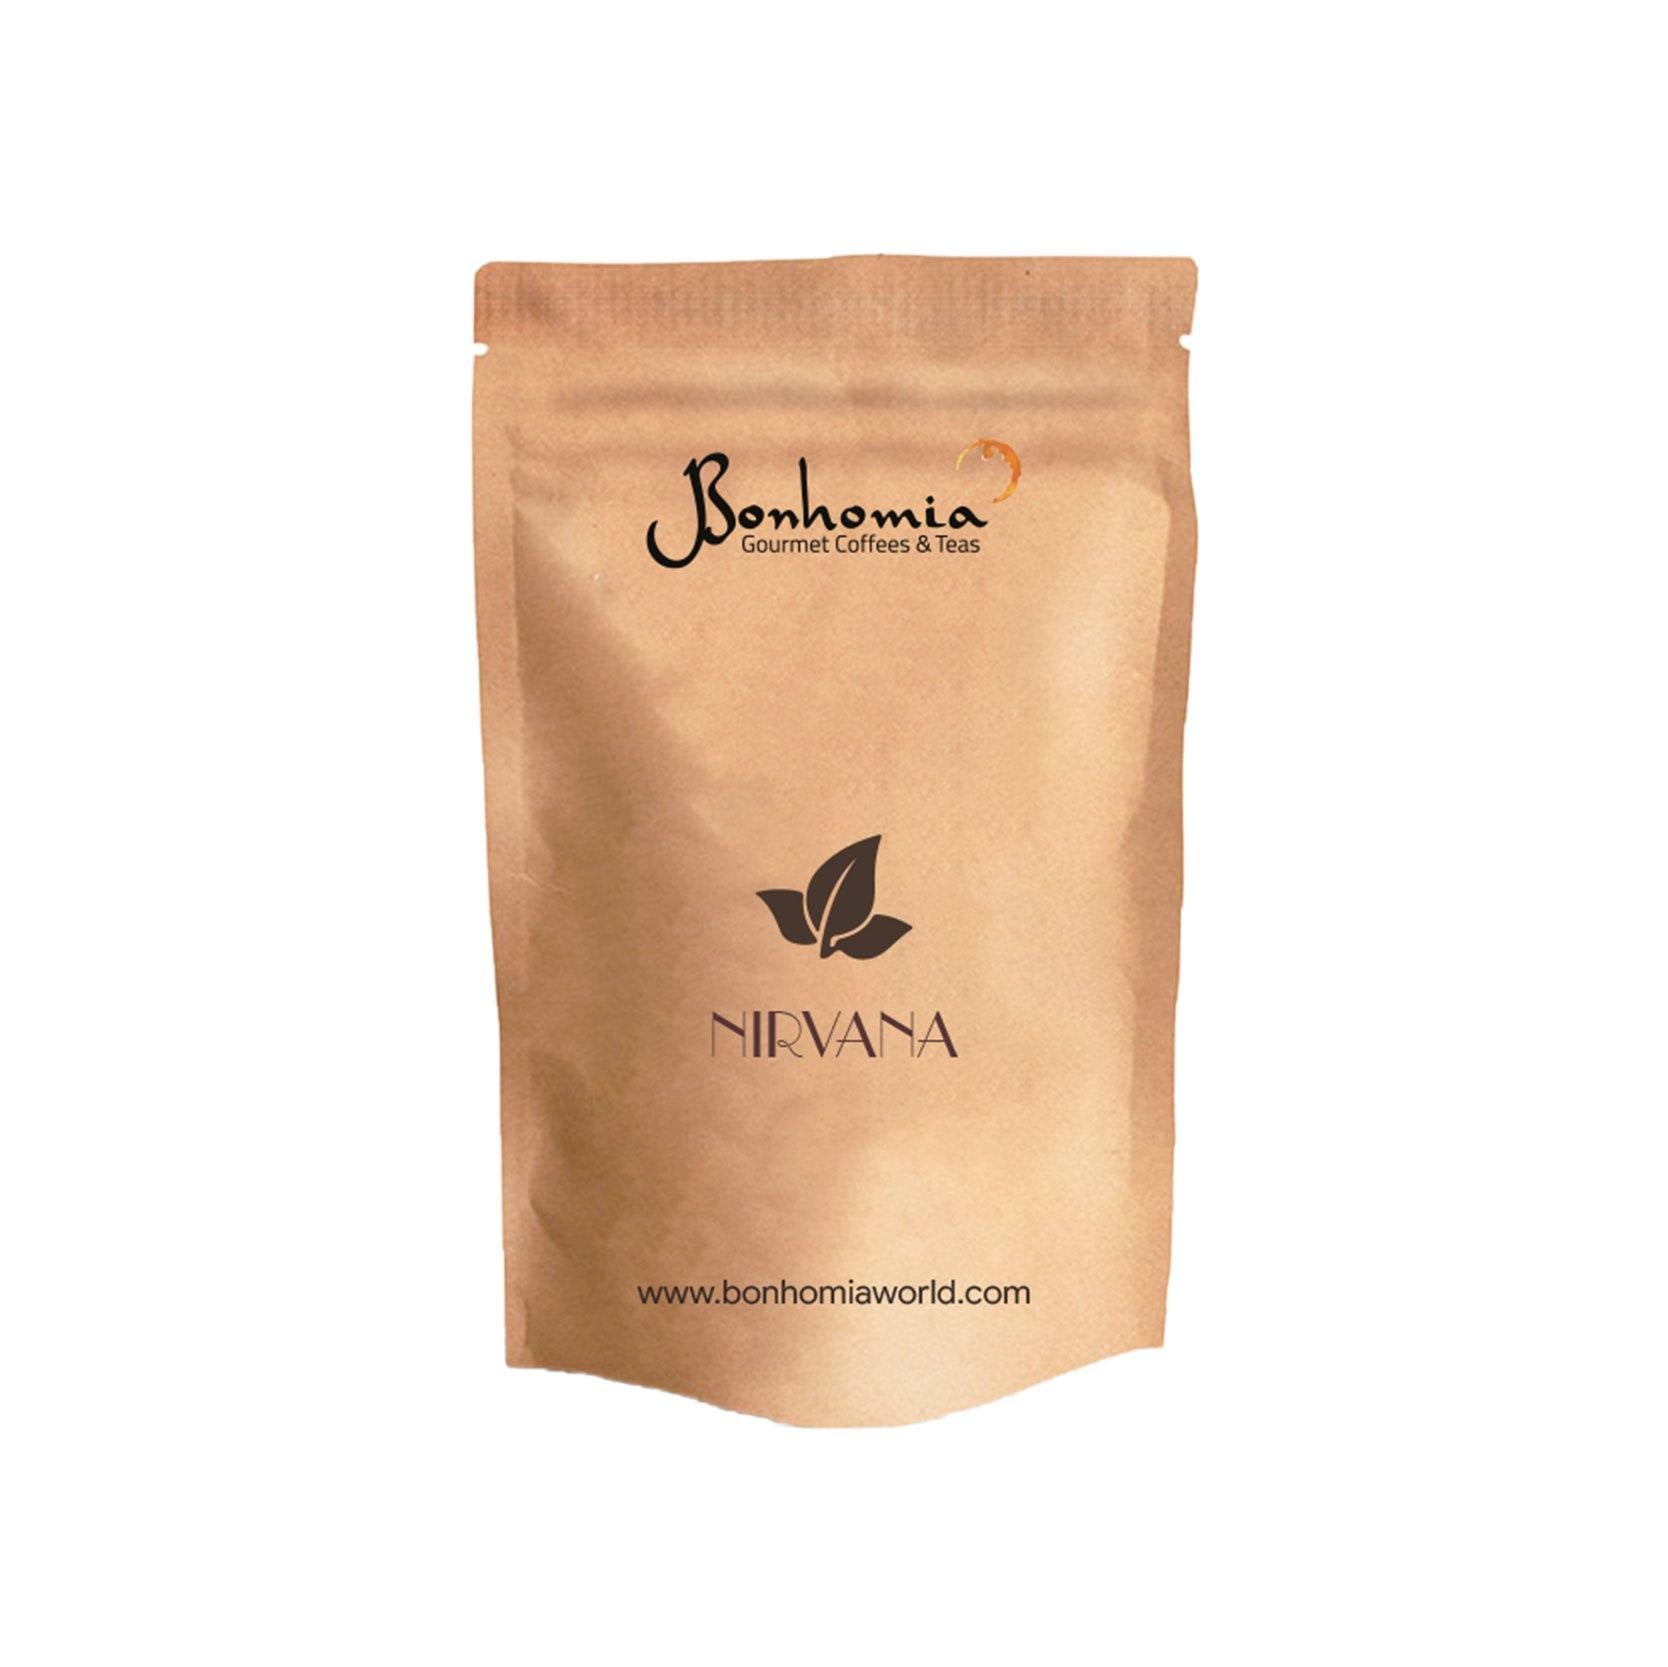 Bonhomia Nirvana | Strong coffee Drip Bags | Pack of 10 Easy pour coffee brew bags